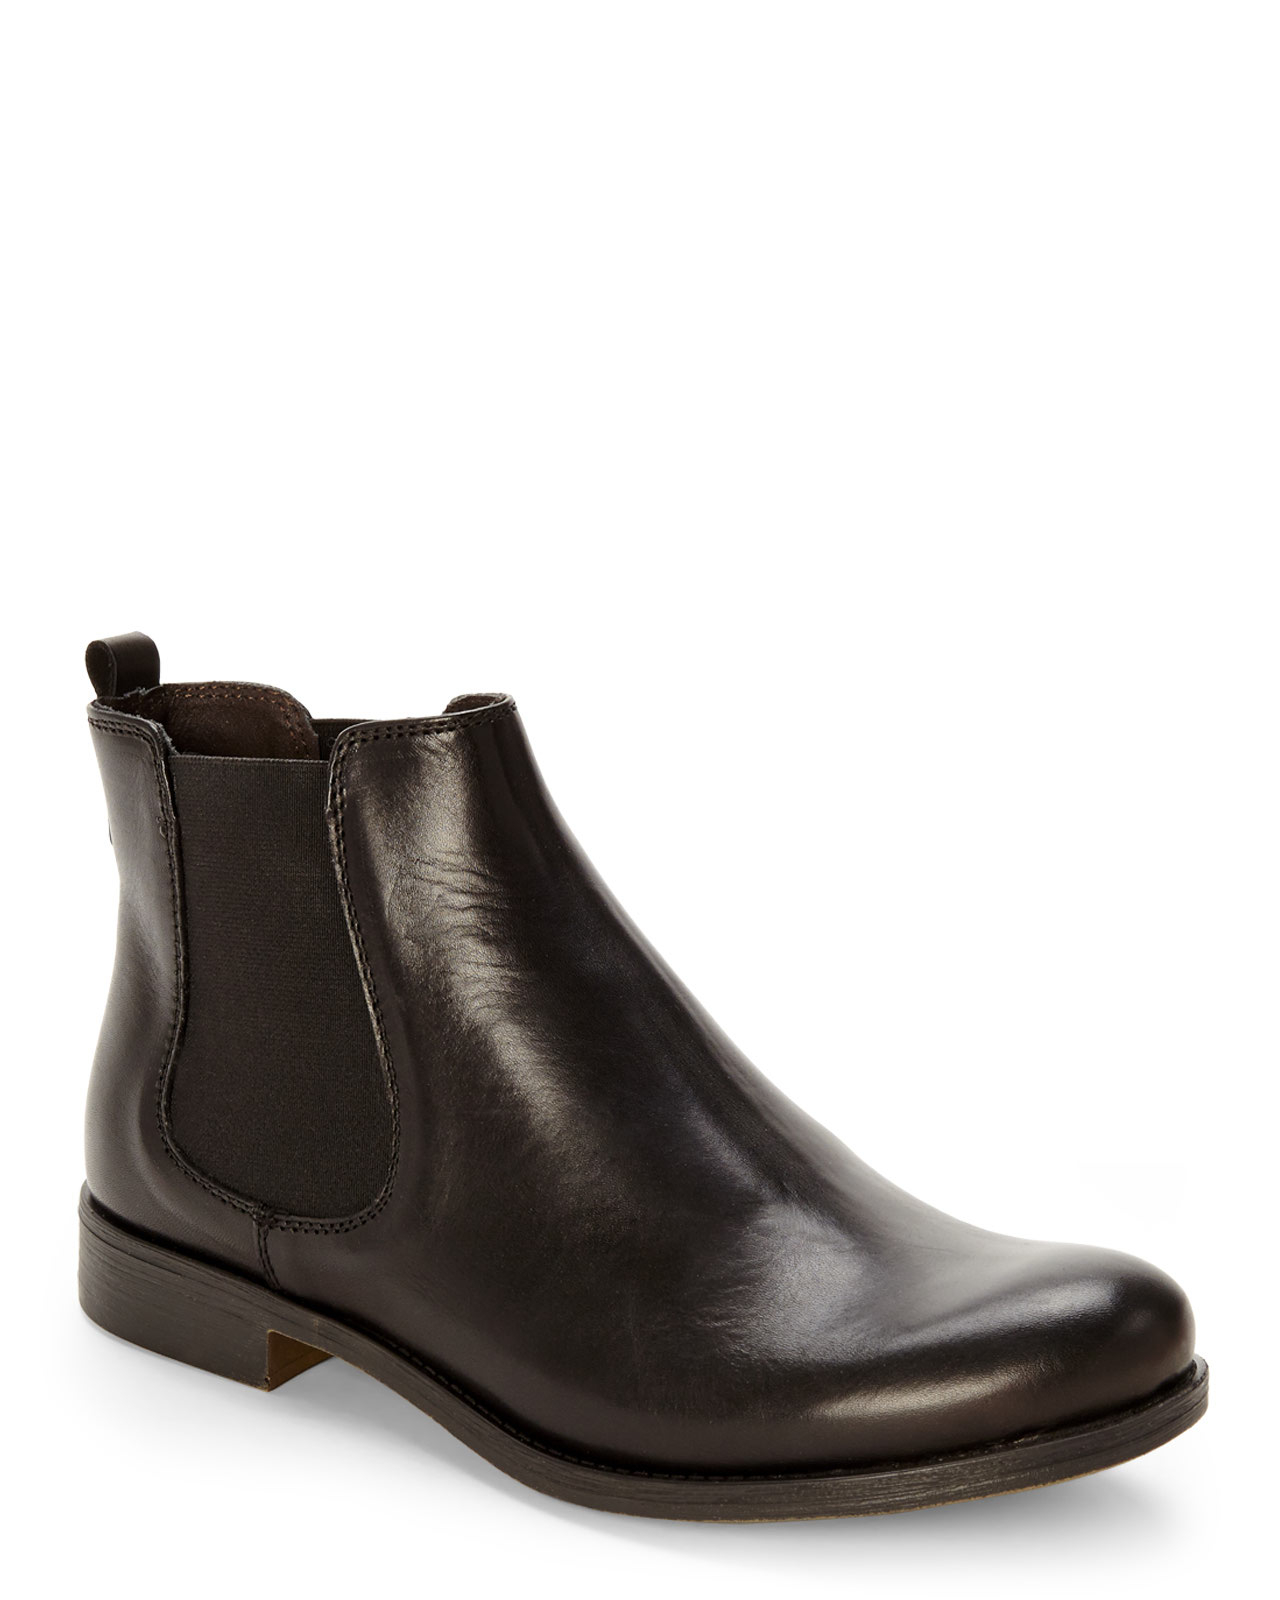 Dune London Black Paddy D Chelsea Boots in Black | Lyst